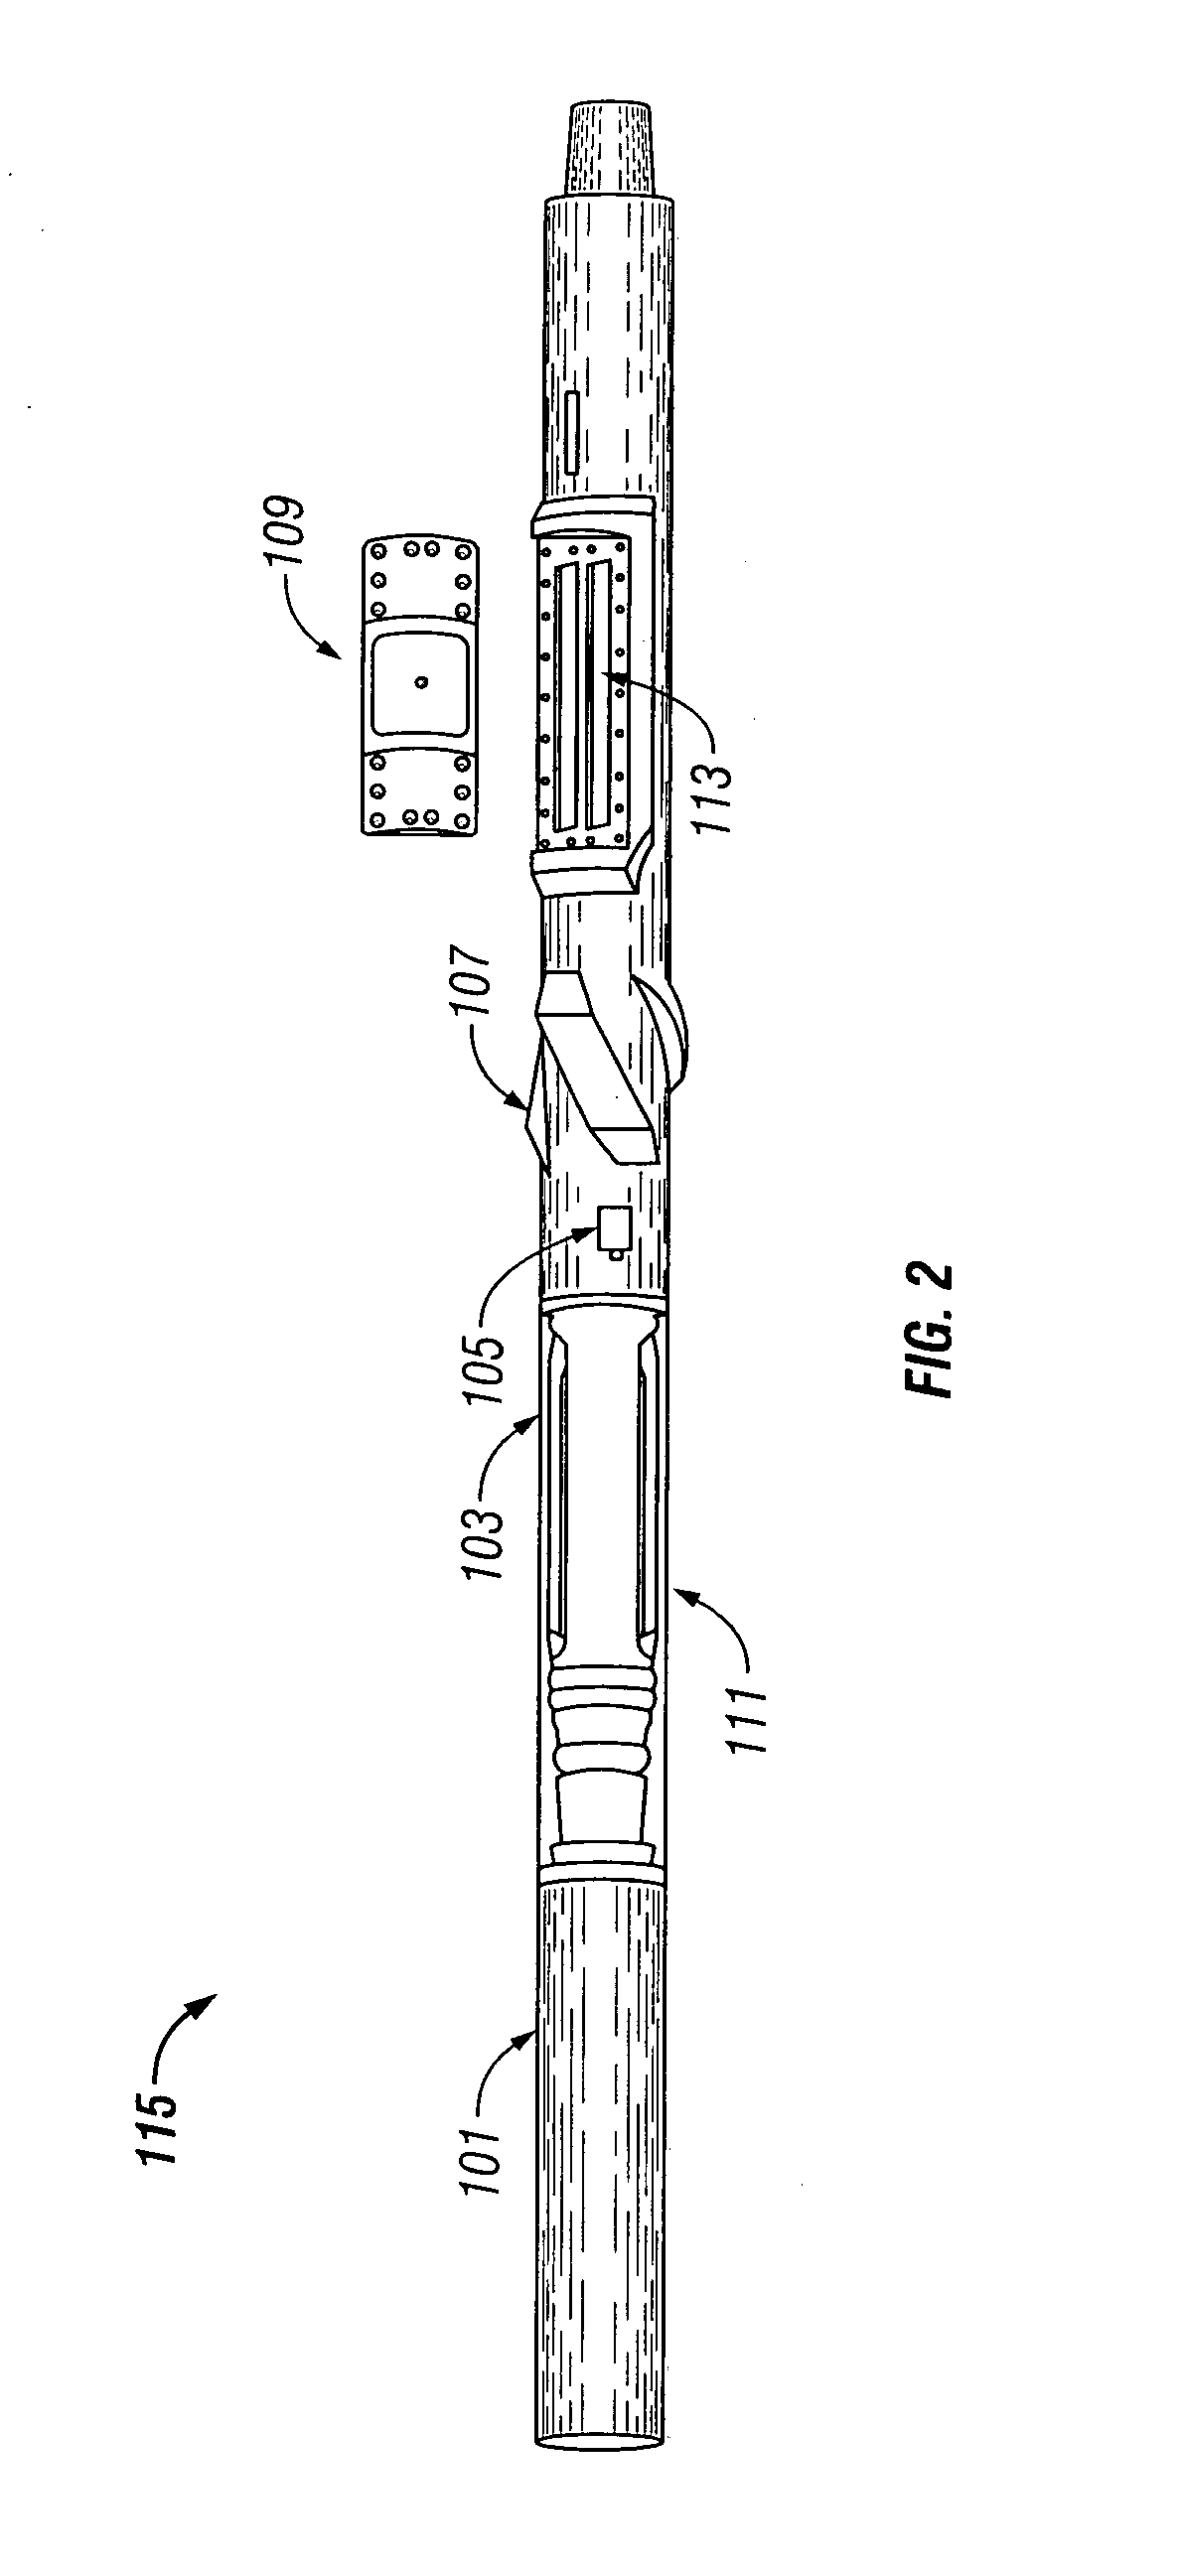 Apparatus and method for resistivity measurements during rotational drilling